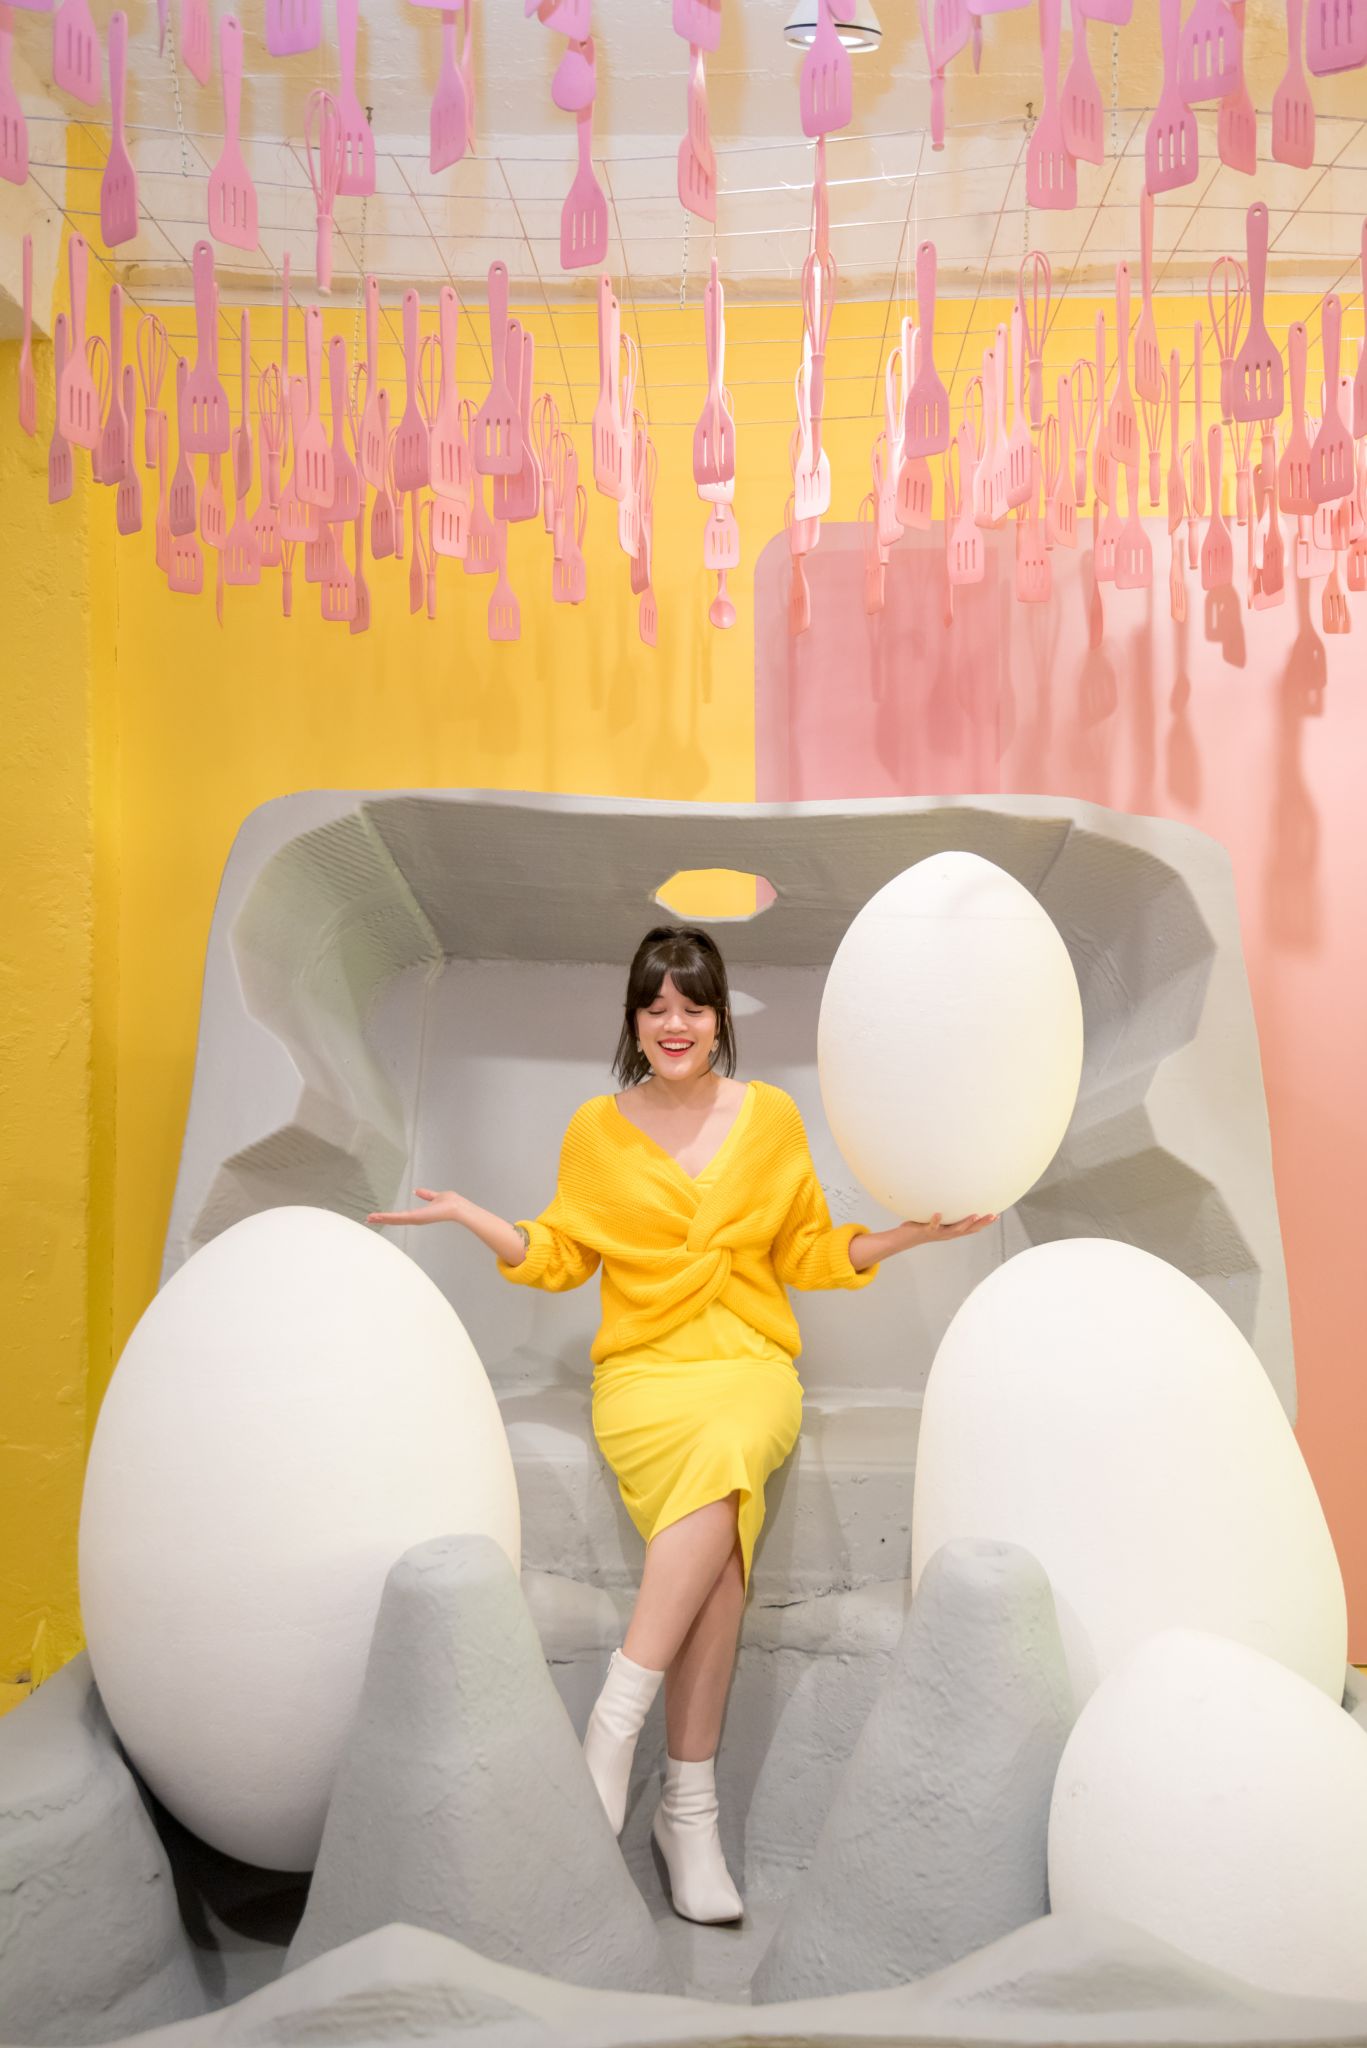 An egg-themed pop-up installation is coming to DTLA